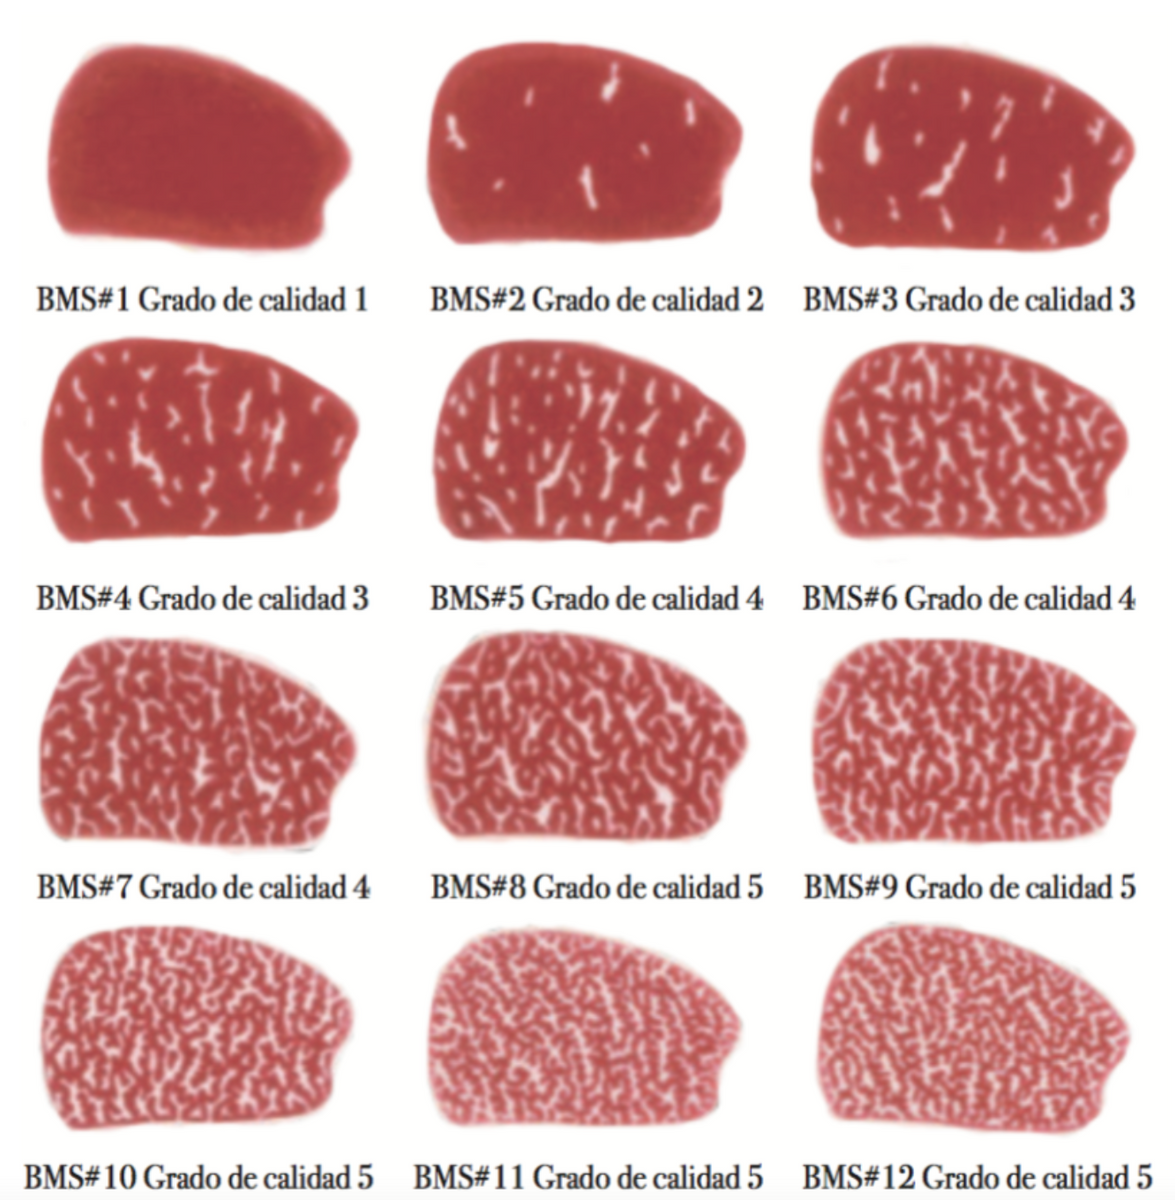 WAGYU GRADING SYSTEM – The Gourmet Market